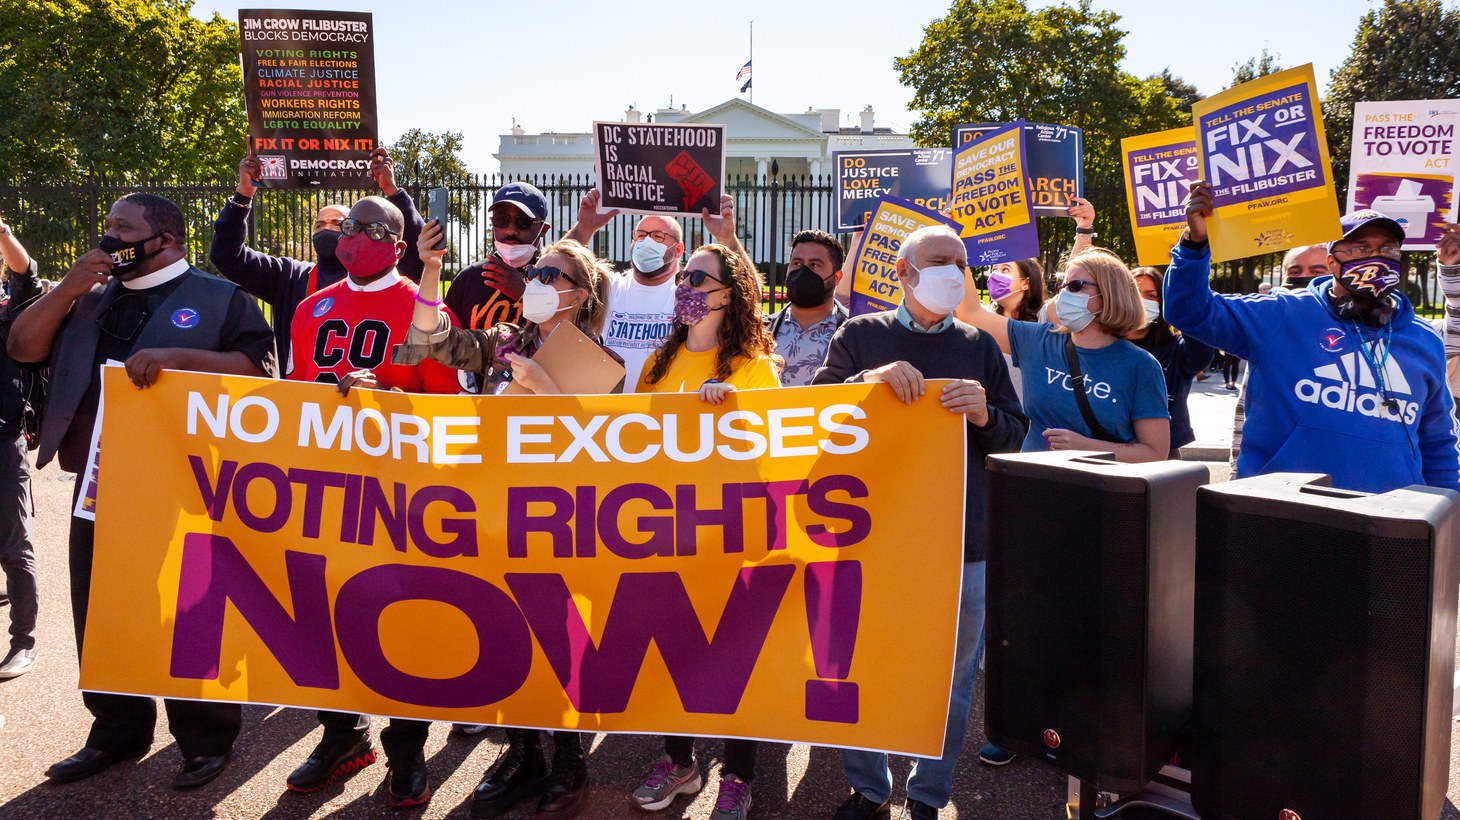 Voting Rights March - No More Excuses banner